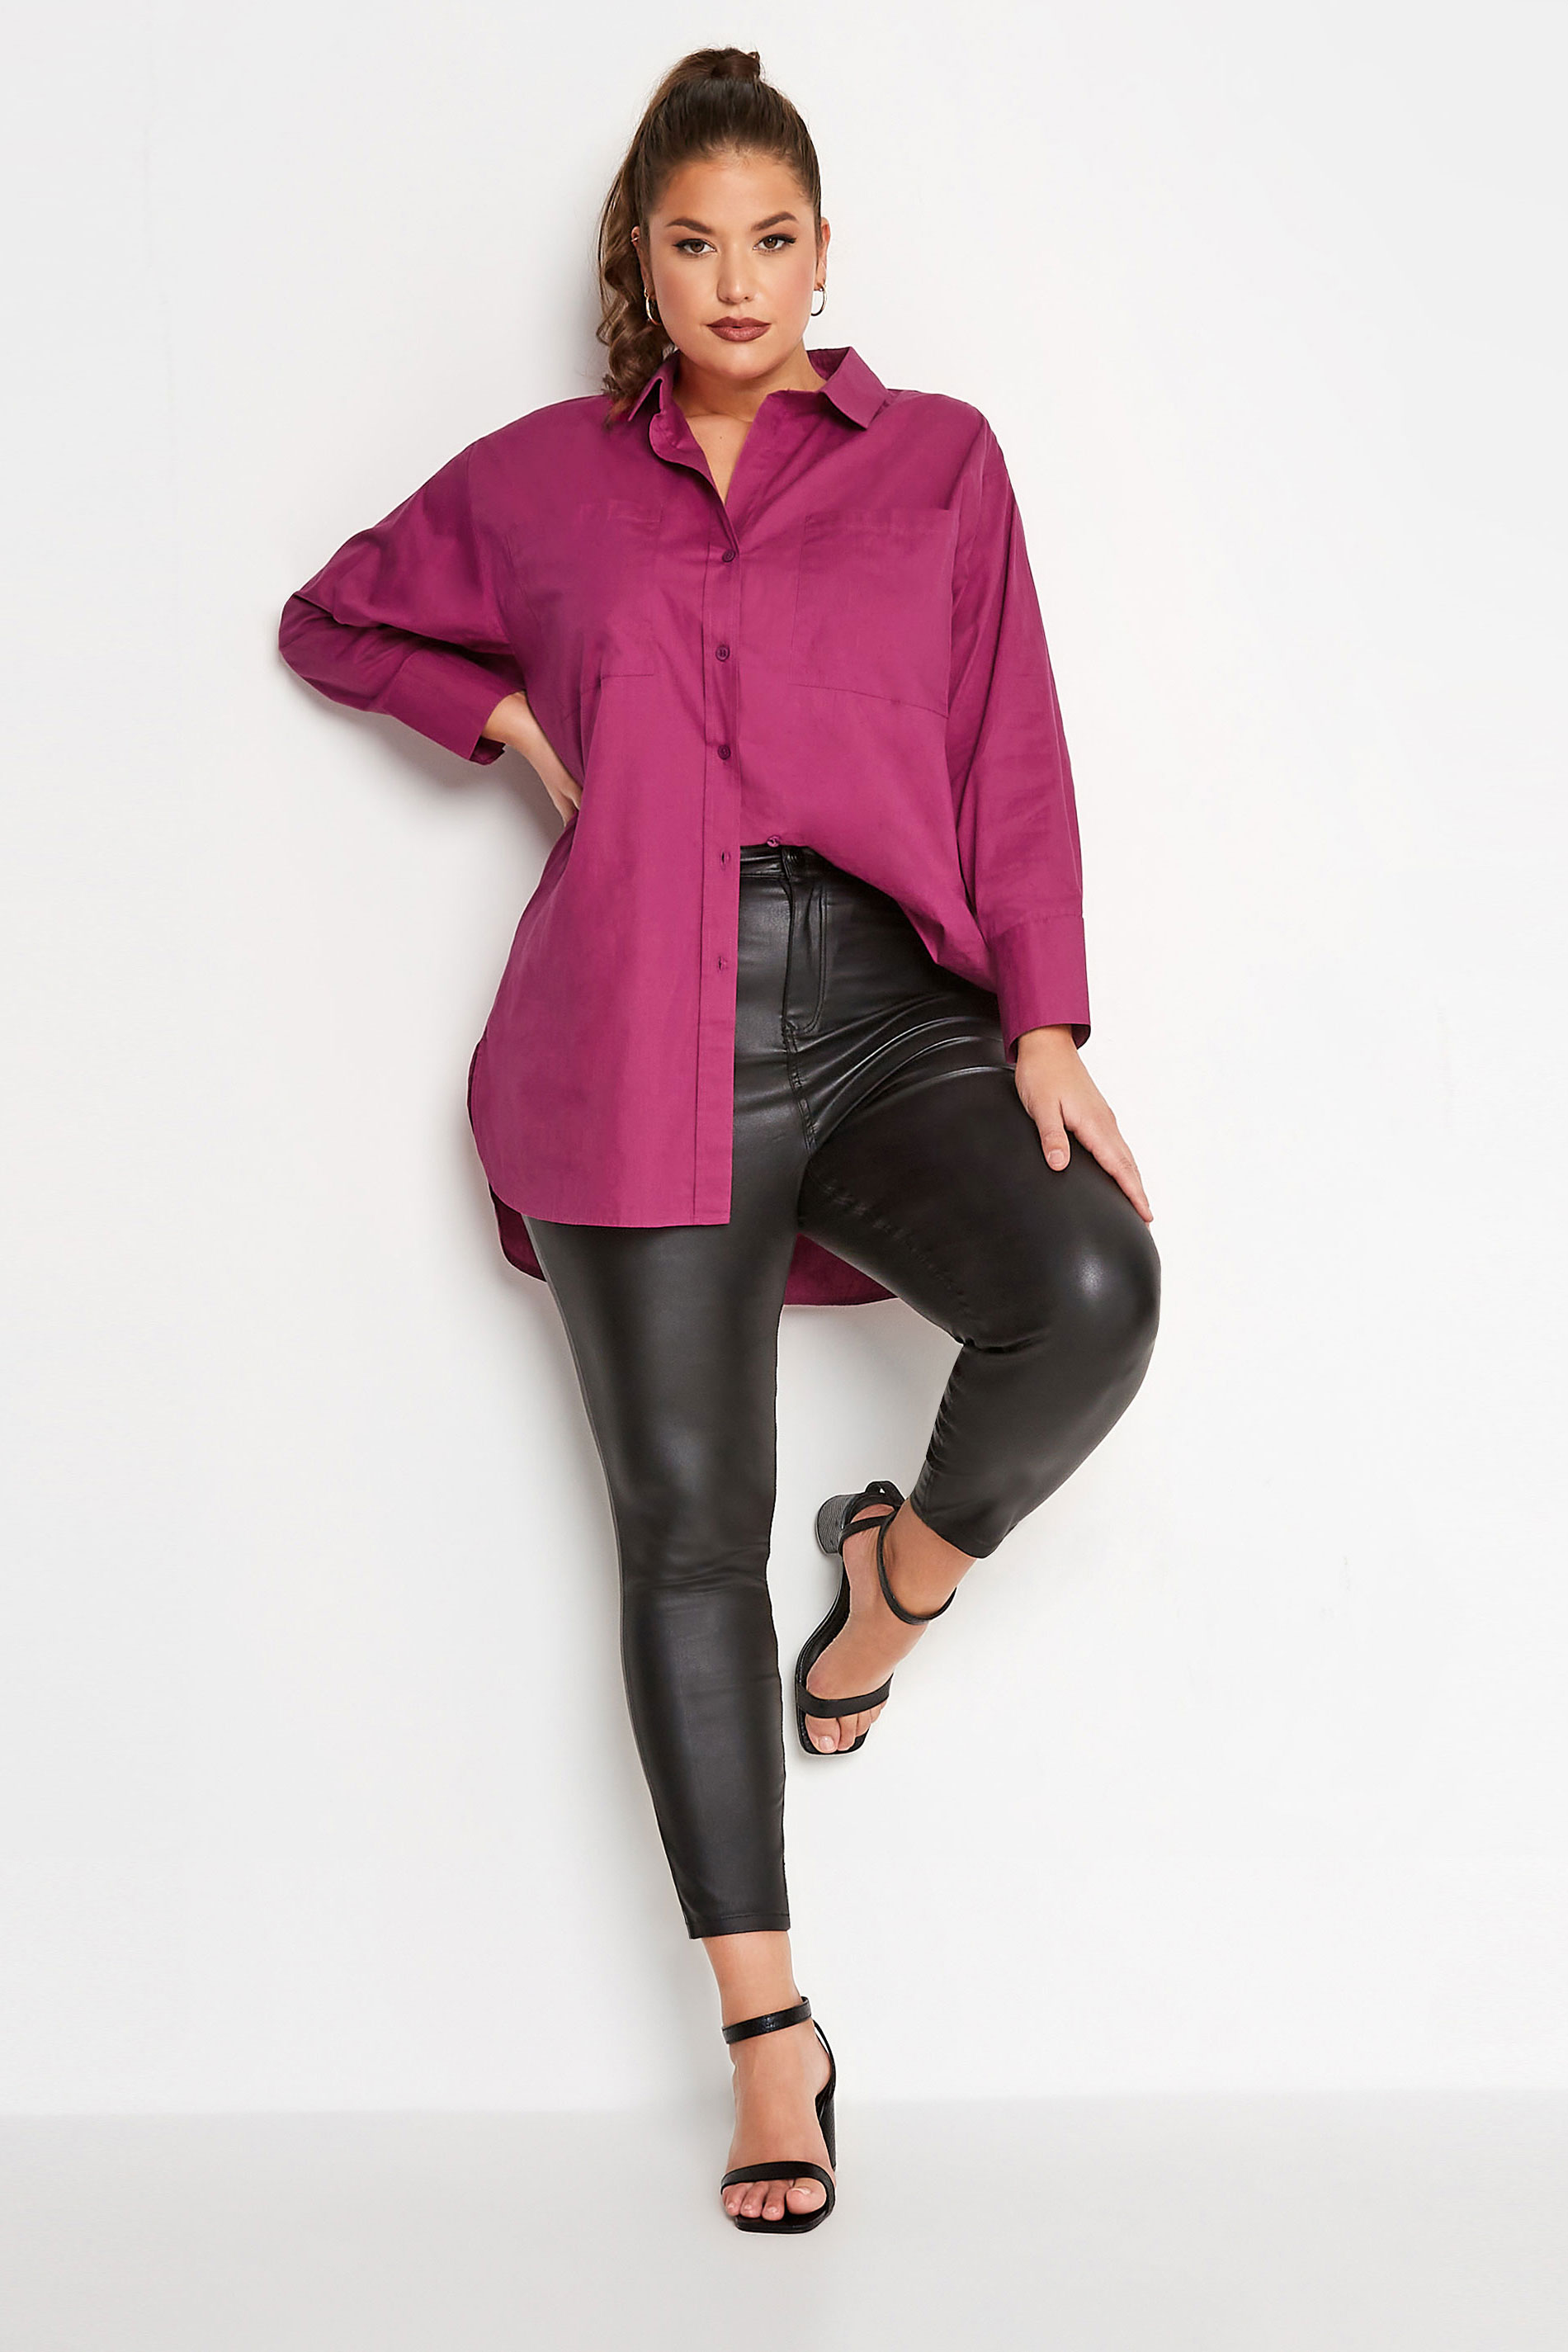 LIMITED COLLECTION Plus Size Pink Oversized Boyfriend Shirt | Yours Clothing 2